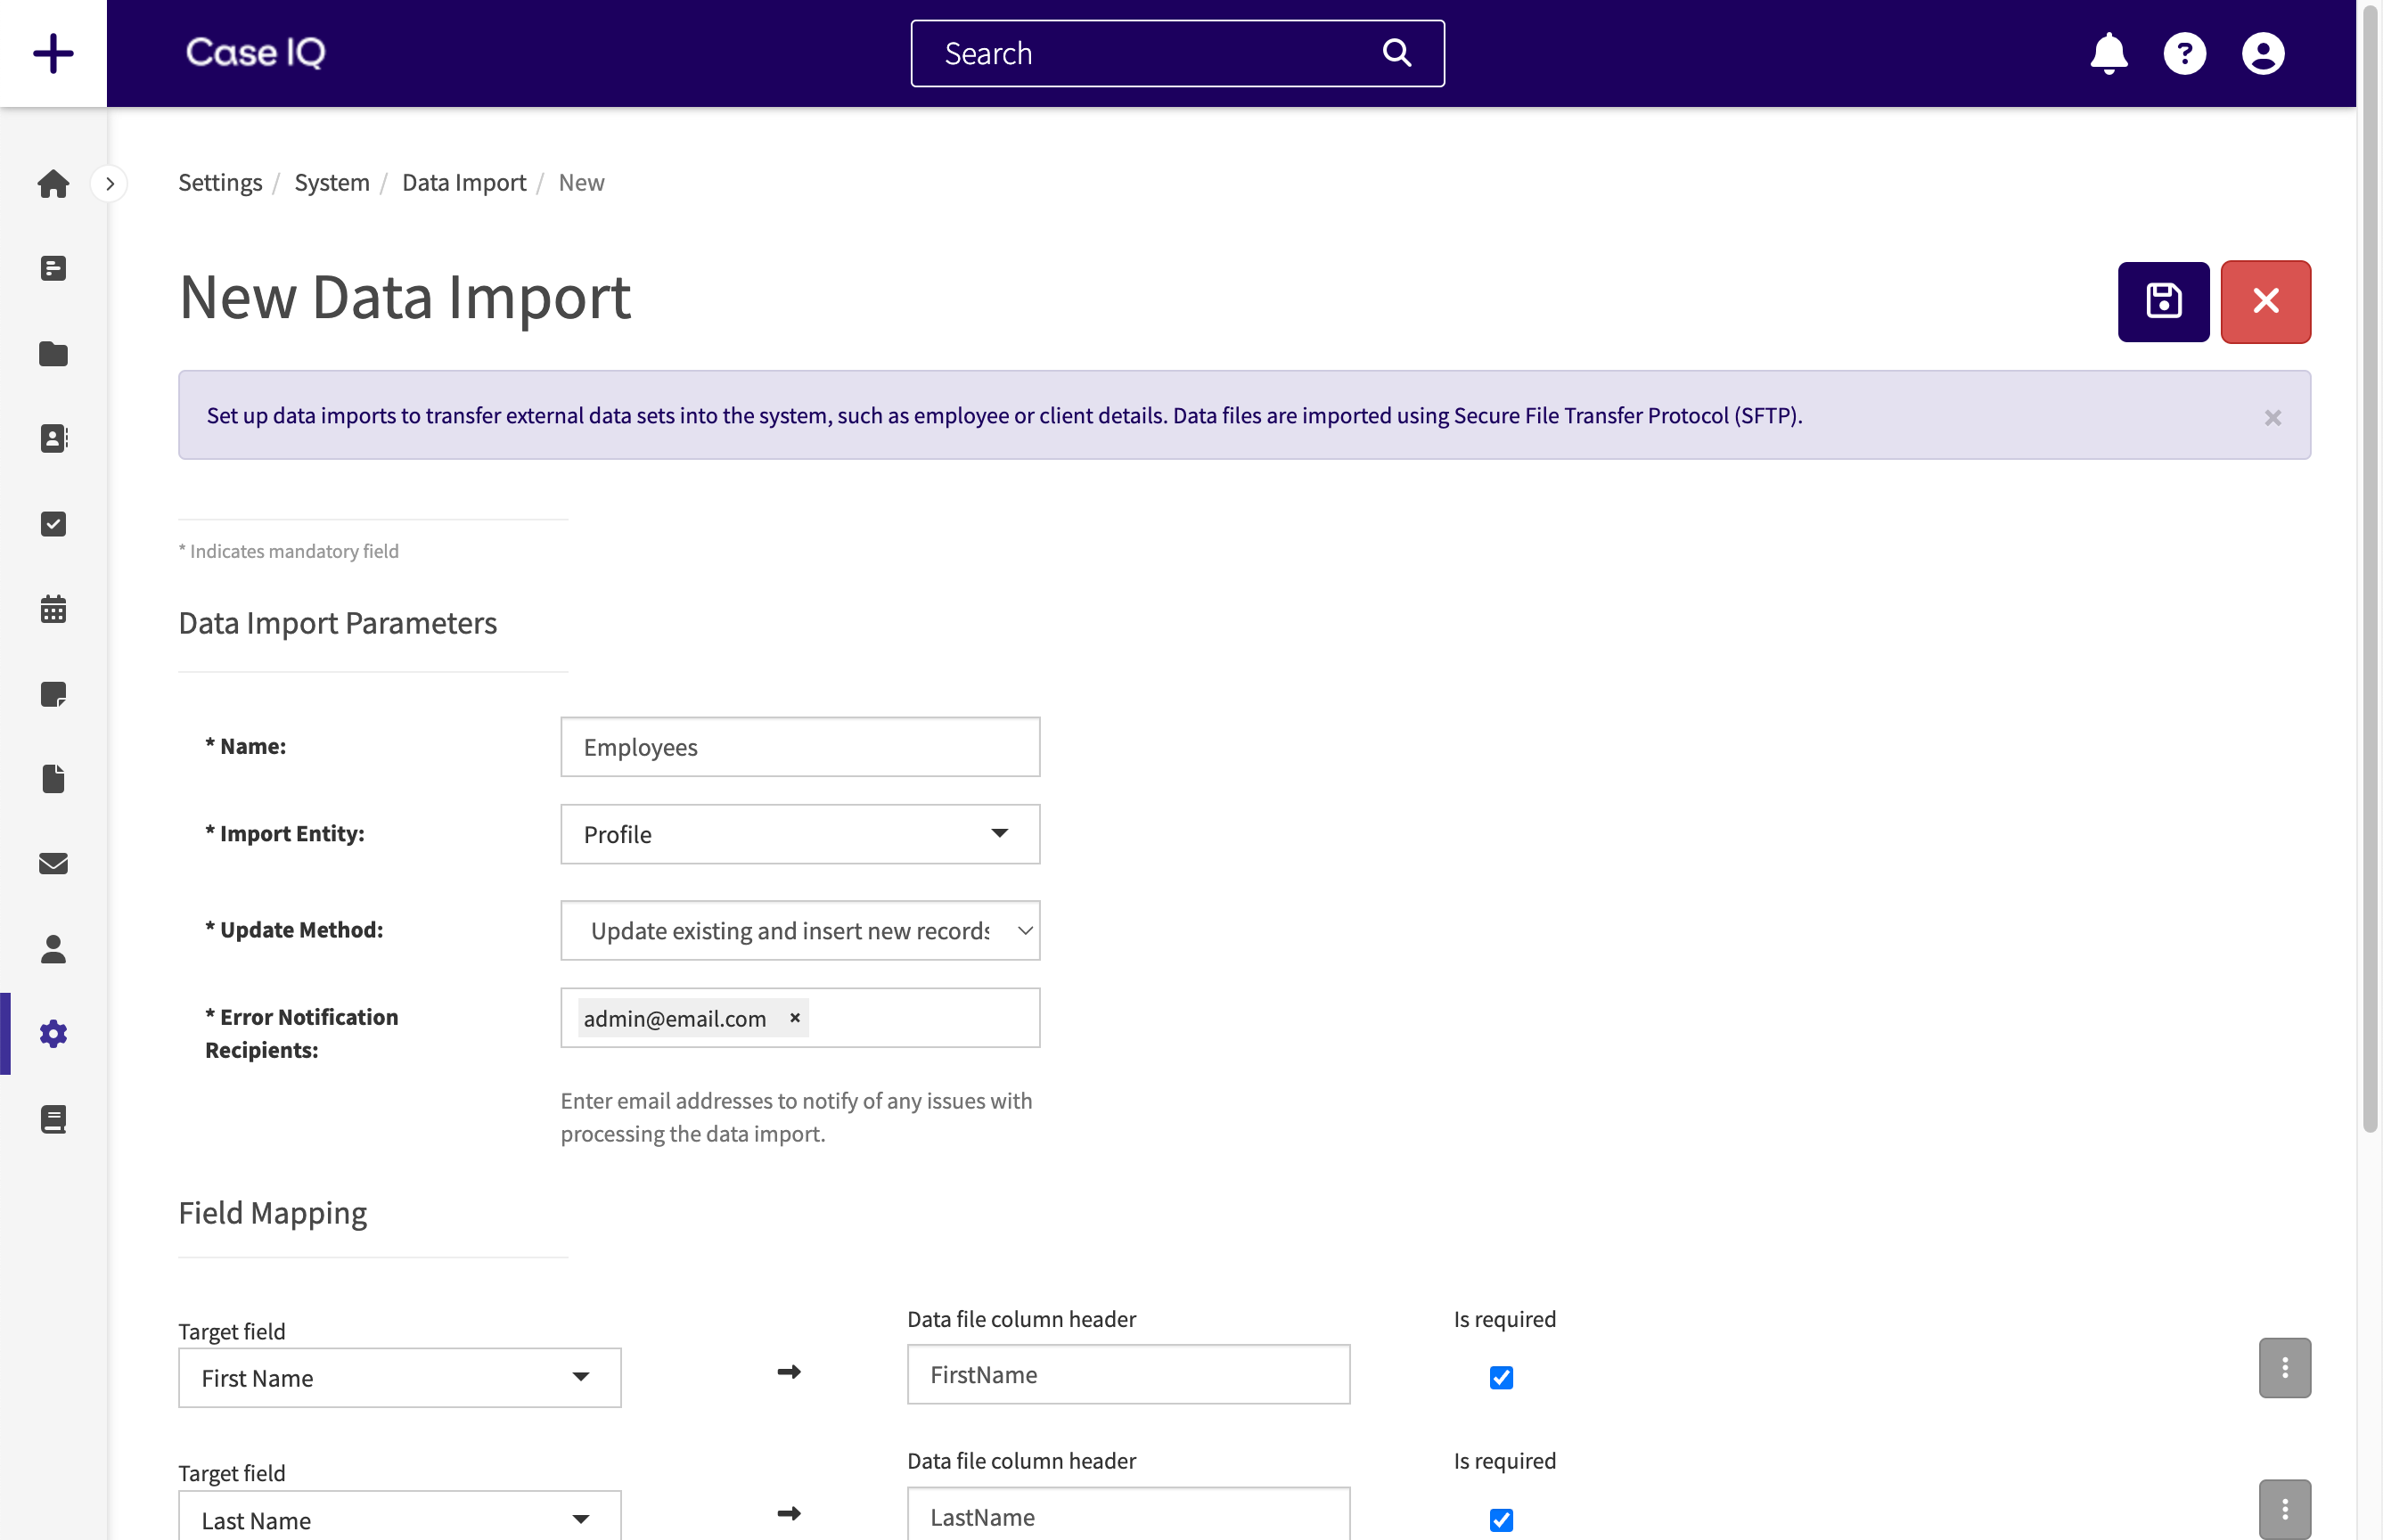 New Data Import form